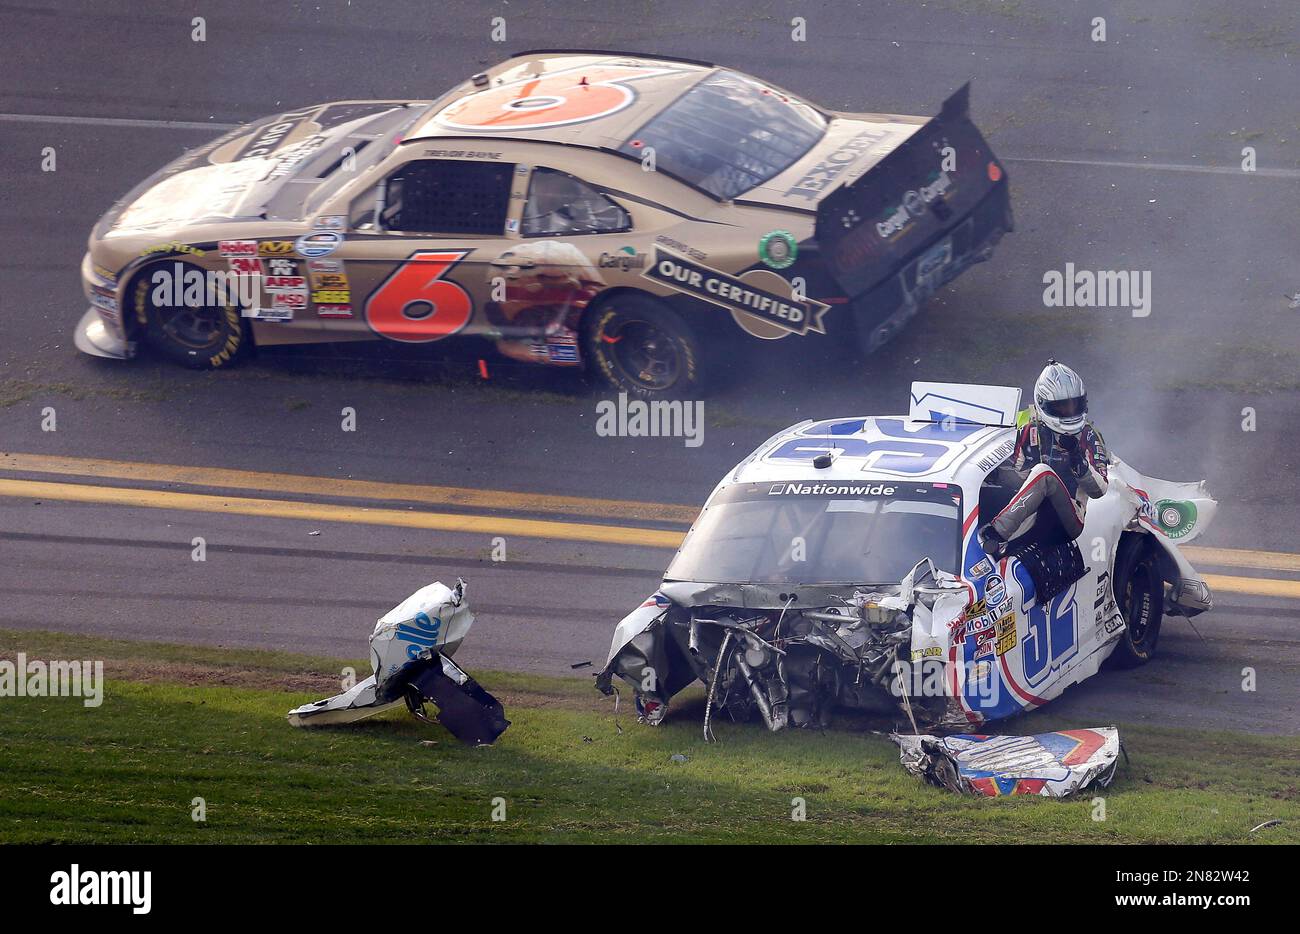 Driver Kyle Larson climbs out of his car as Trevor Bayne (7) rolls past after a crash at the conclusion of the NASCAR Nationwide Series auto race Saturday, Feb